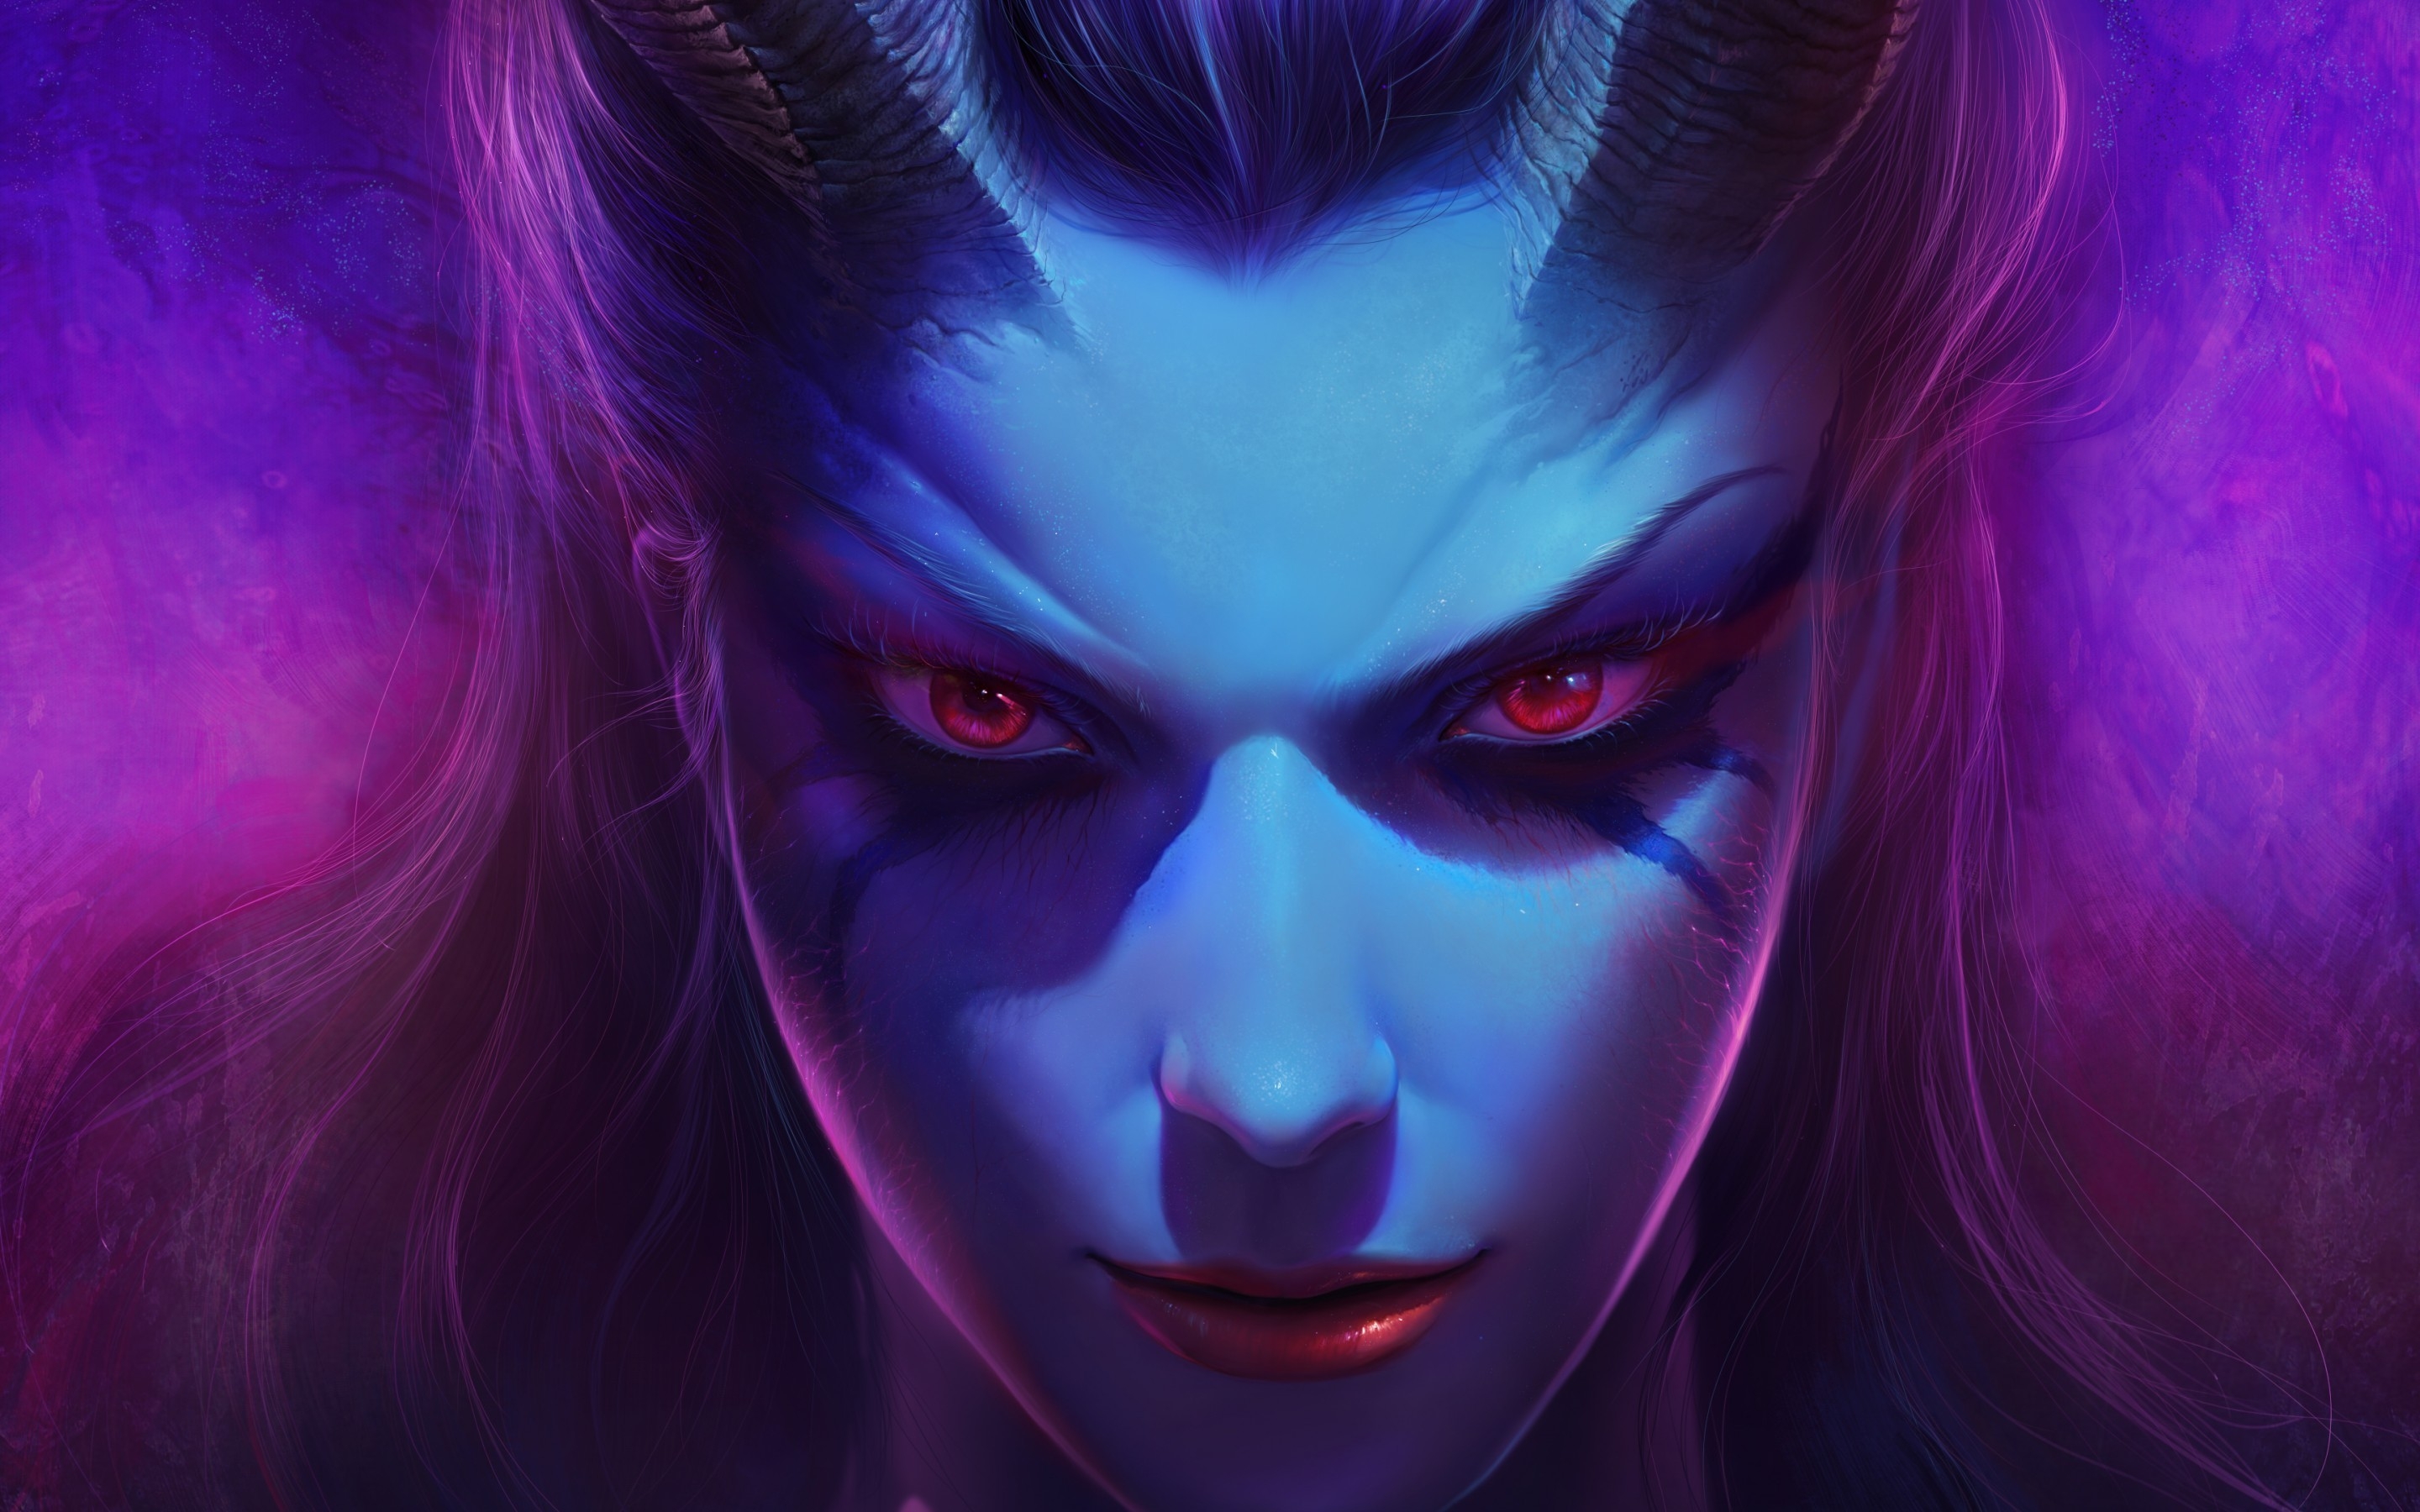 Queen of Pain for 2880 x 1800 Retina Display resolution